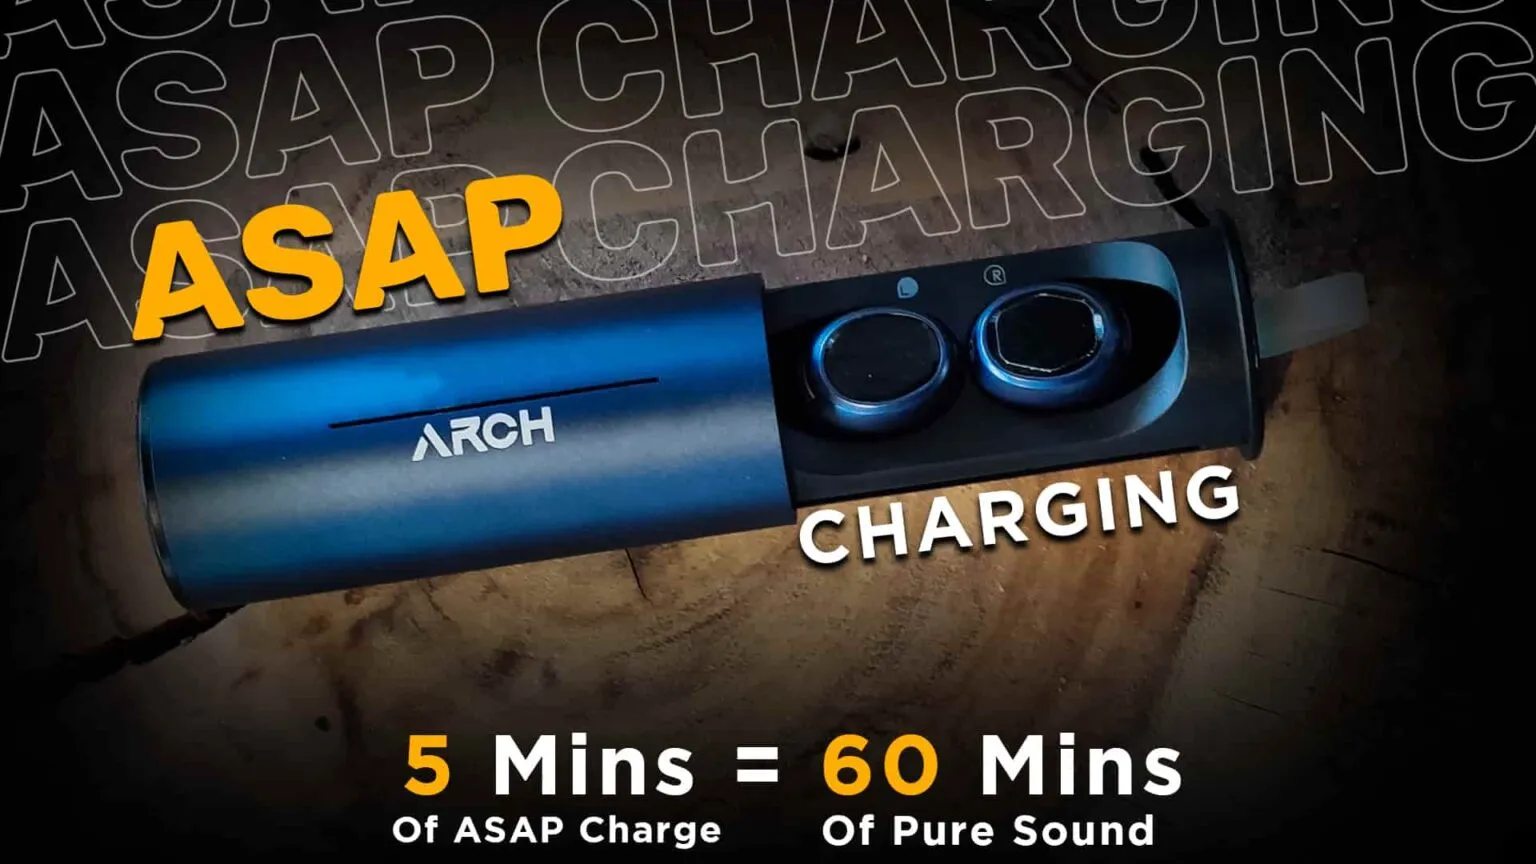 Buy arch beat wireless earbuds, capsule shape earbuds at best price in pakistan| Rhizmall.pk